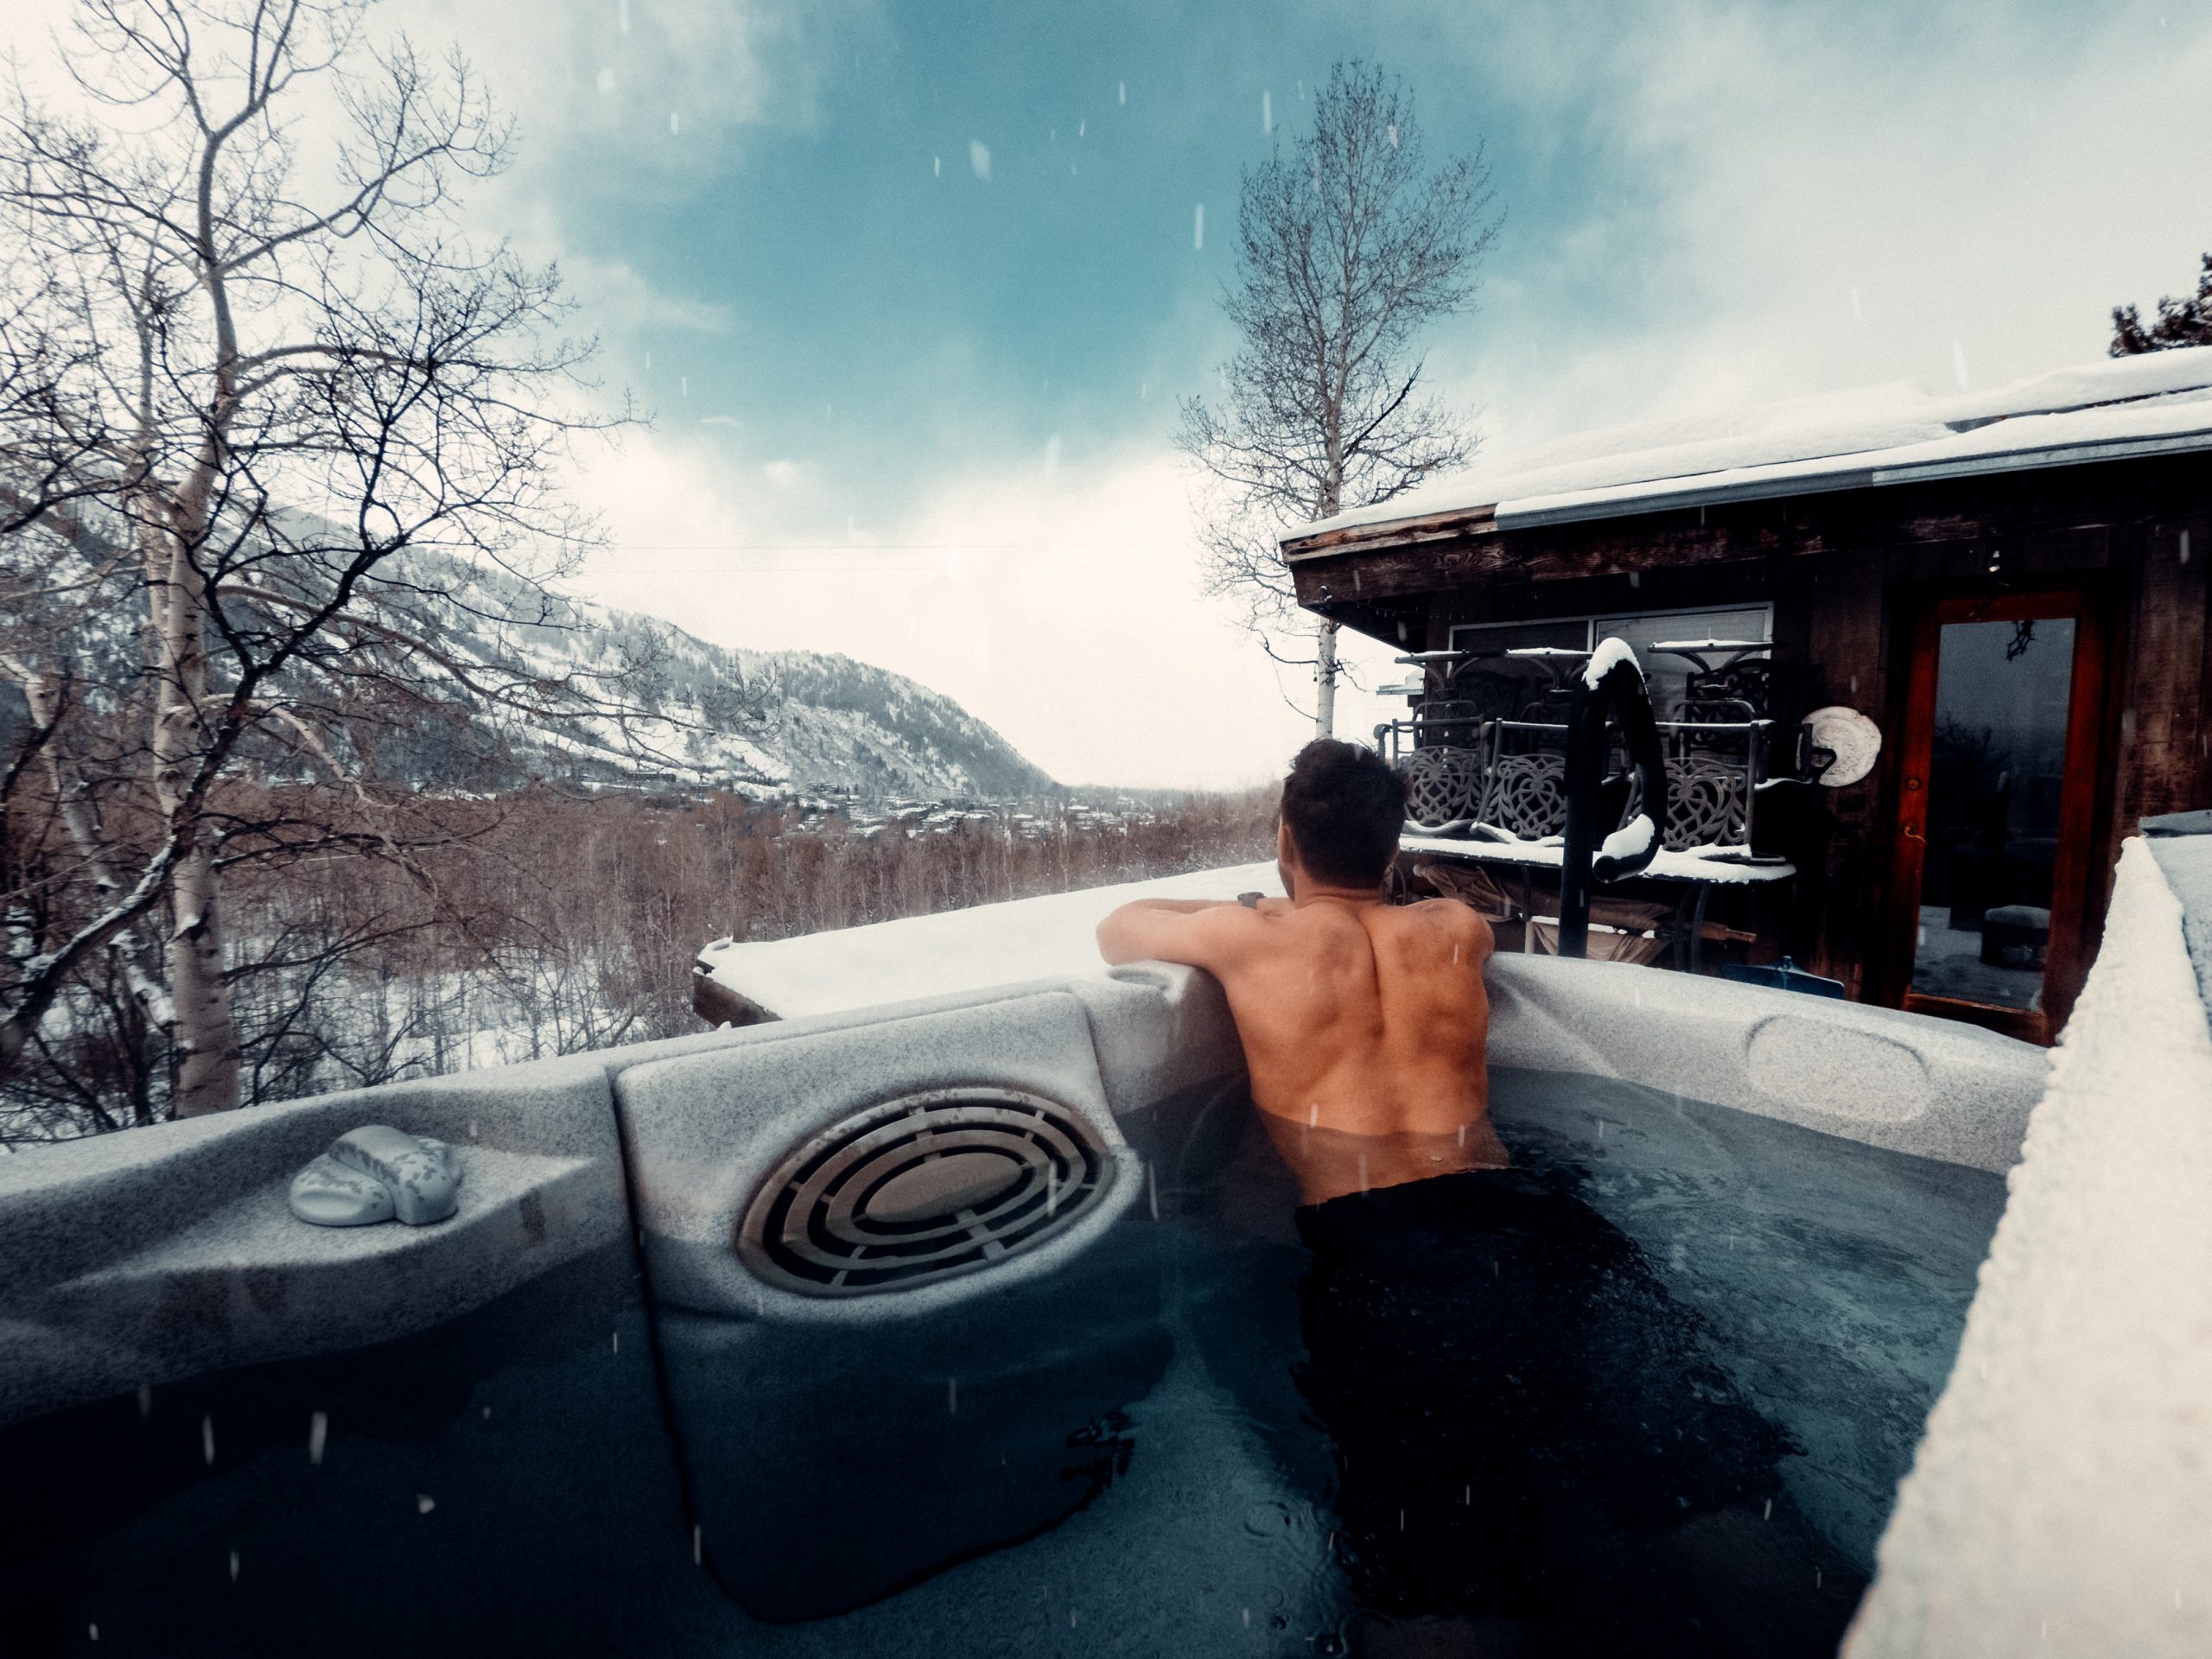 Hot tub in the moutains